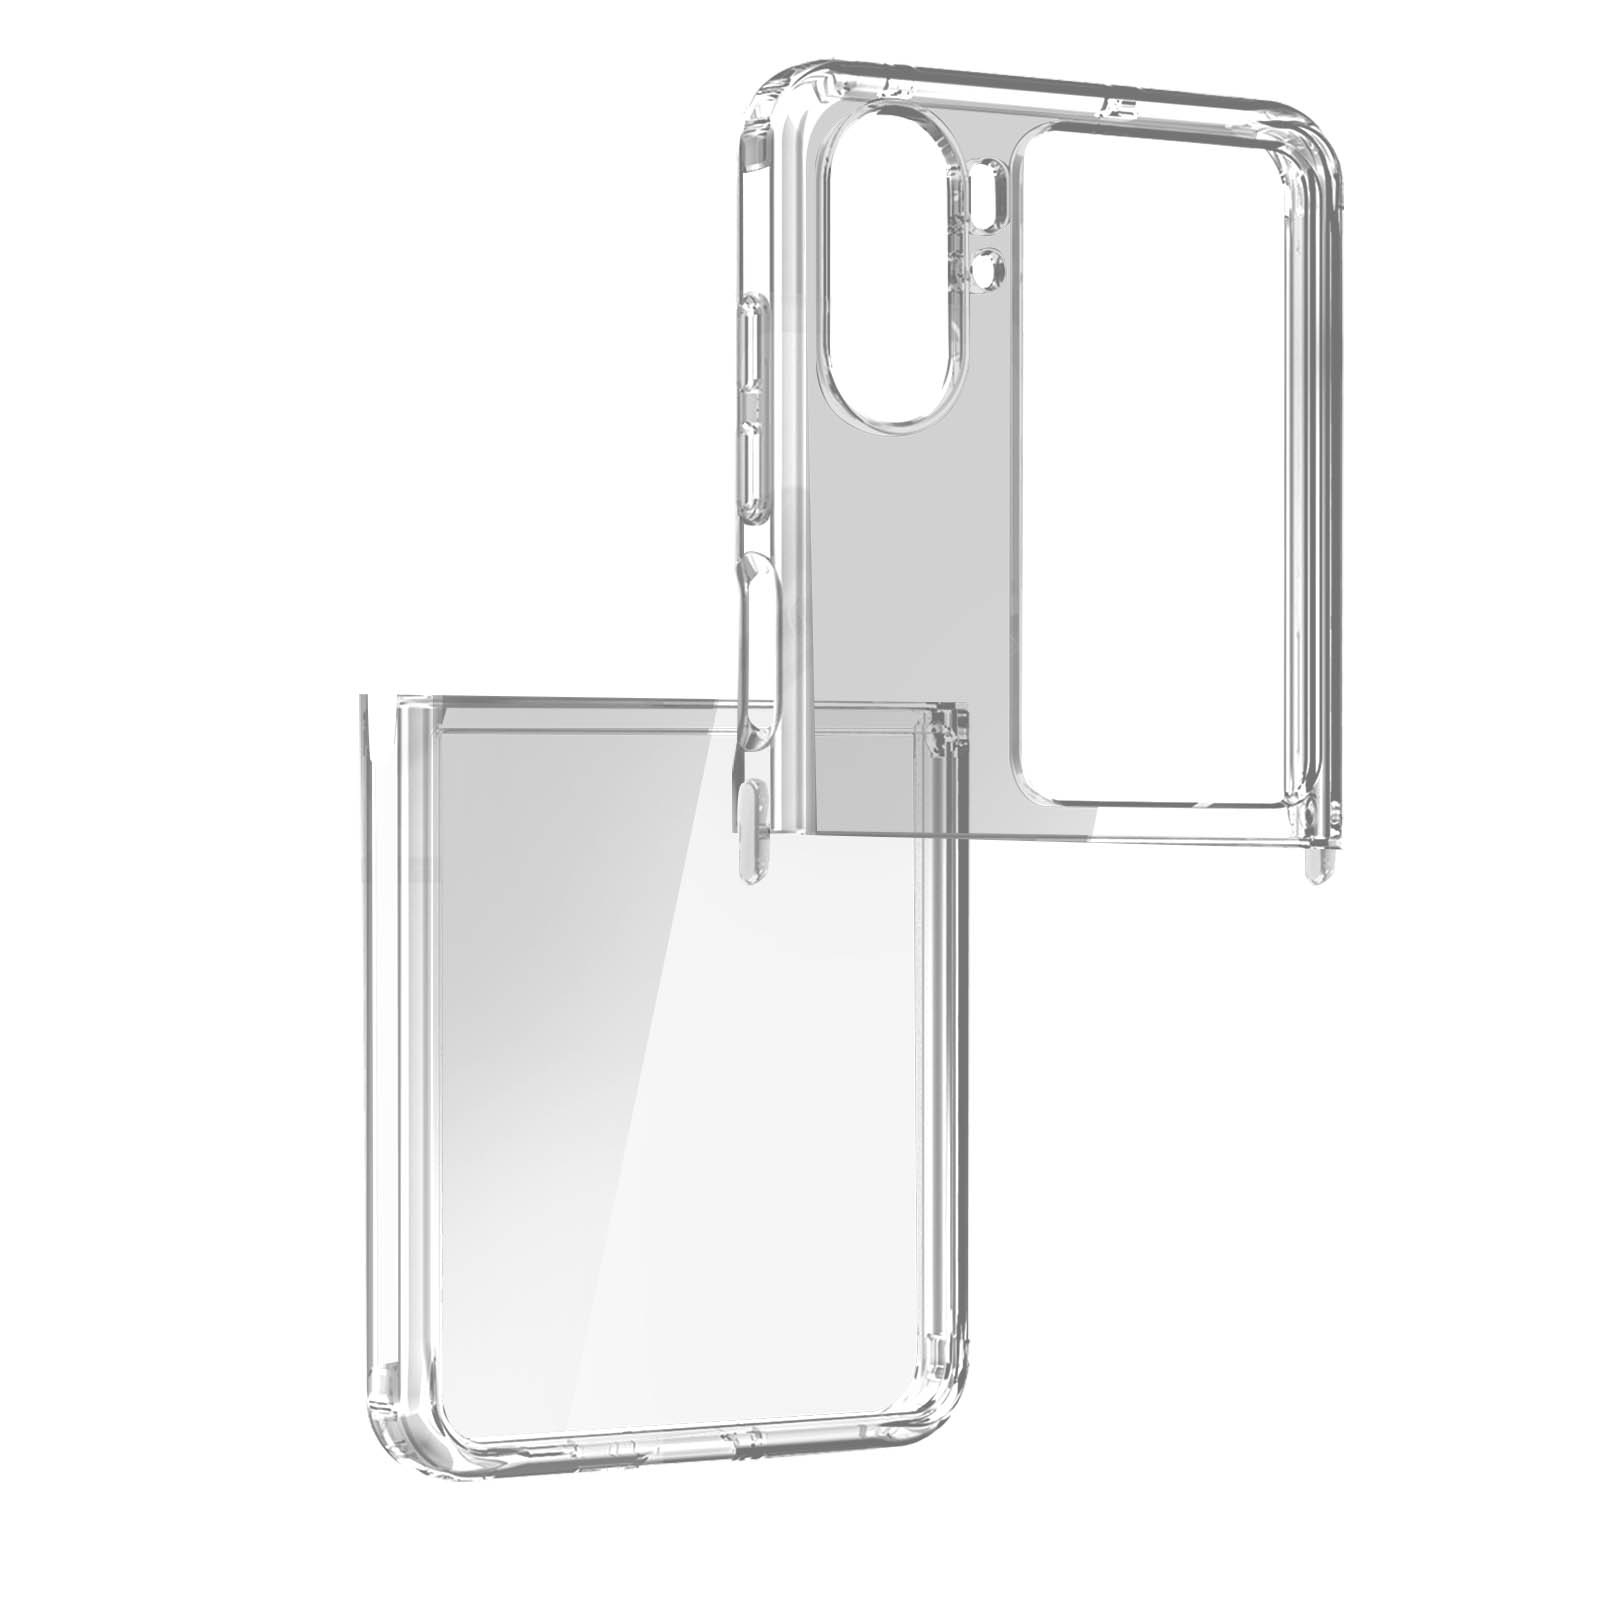 Series, DUX Backcover, Flip, Find DUCIS N2 Transparent Clin Oppo,